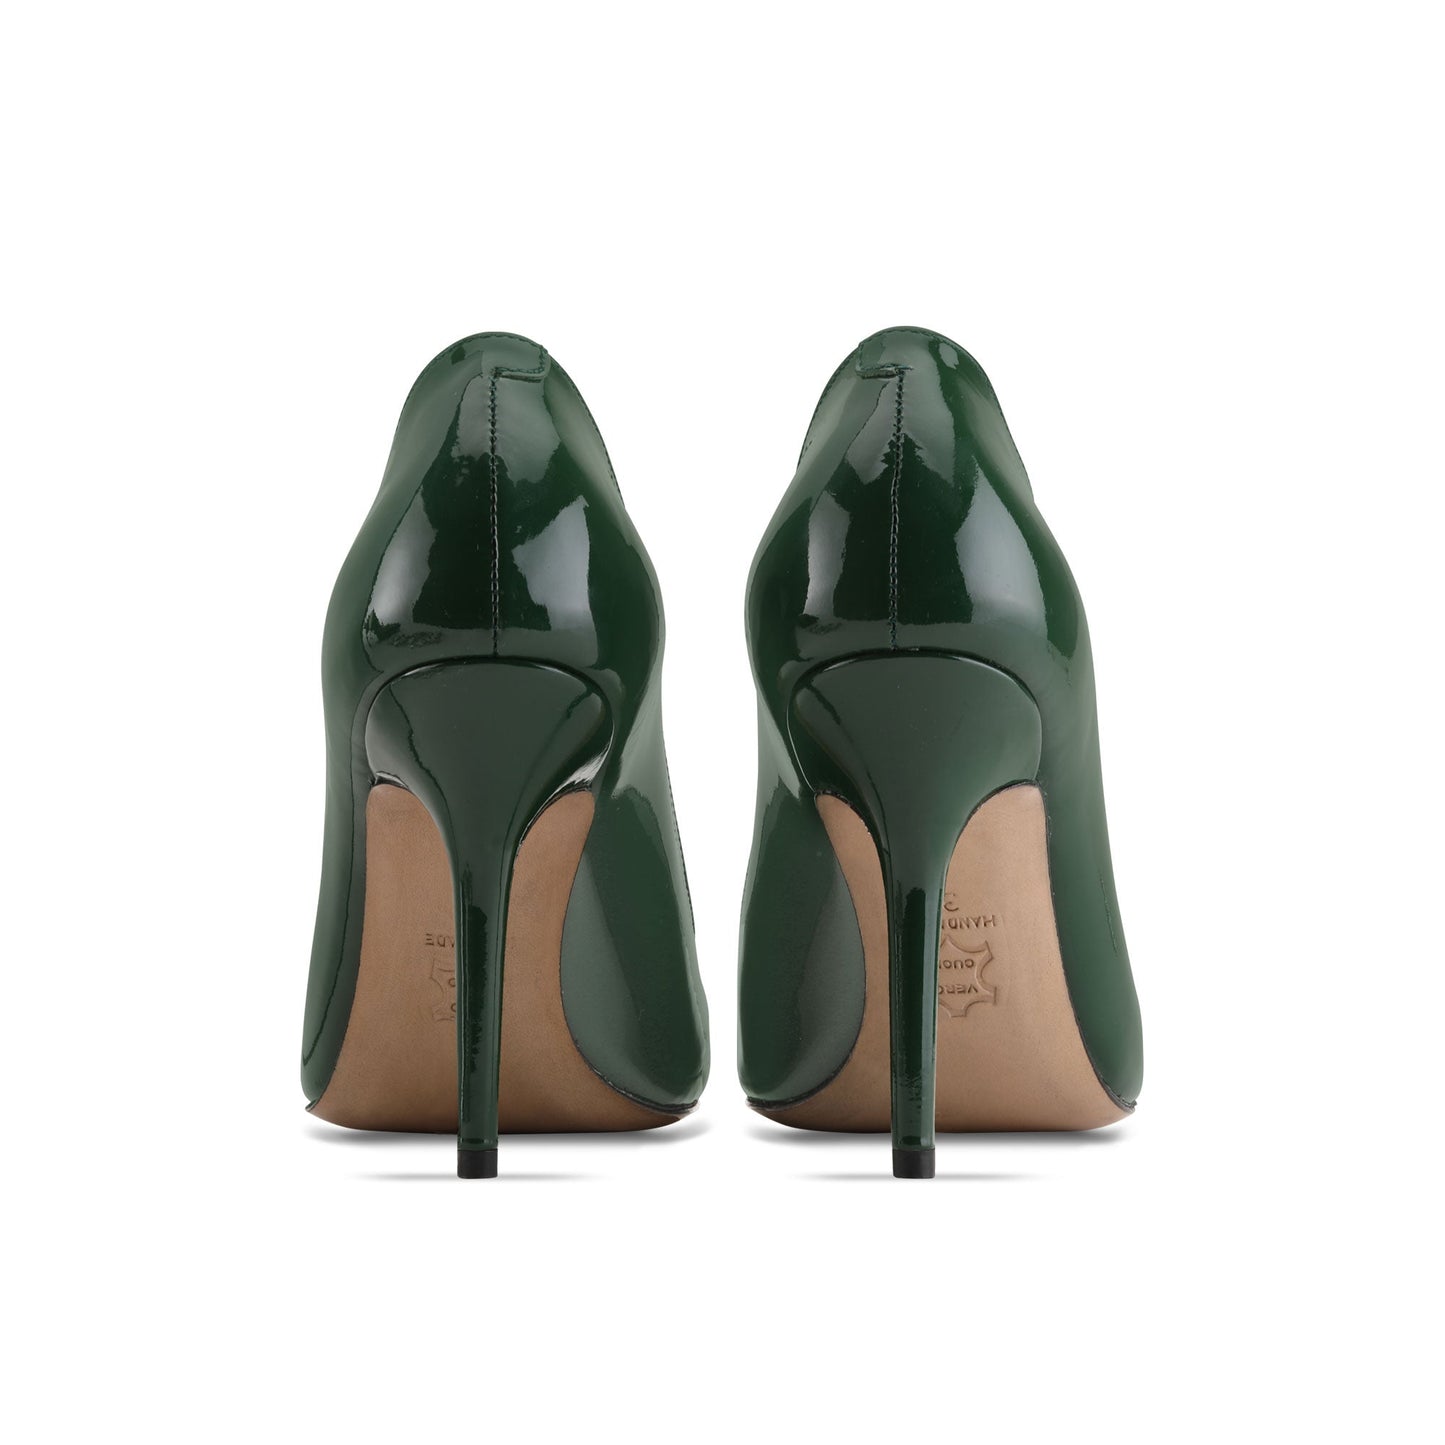 Green lacquered pumps